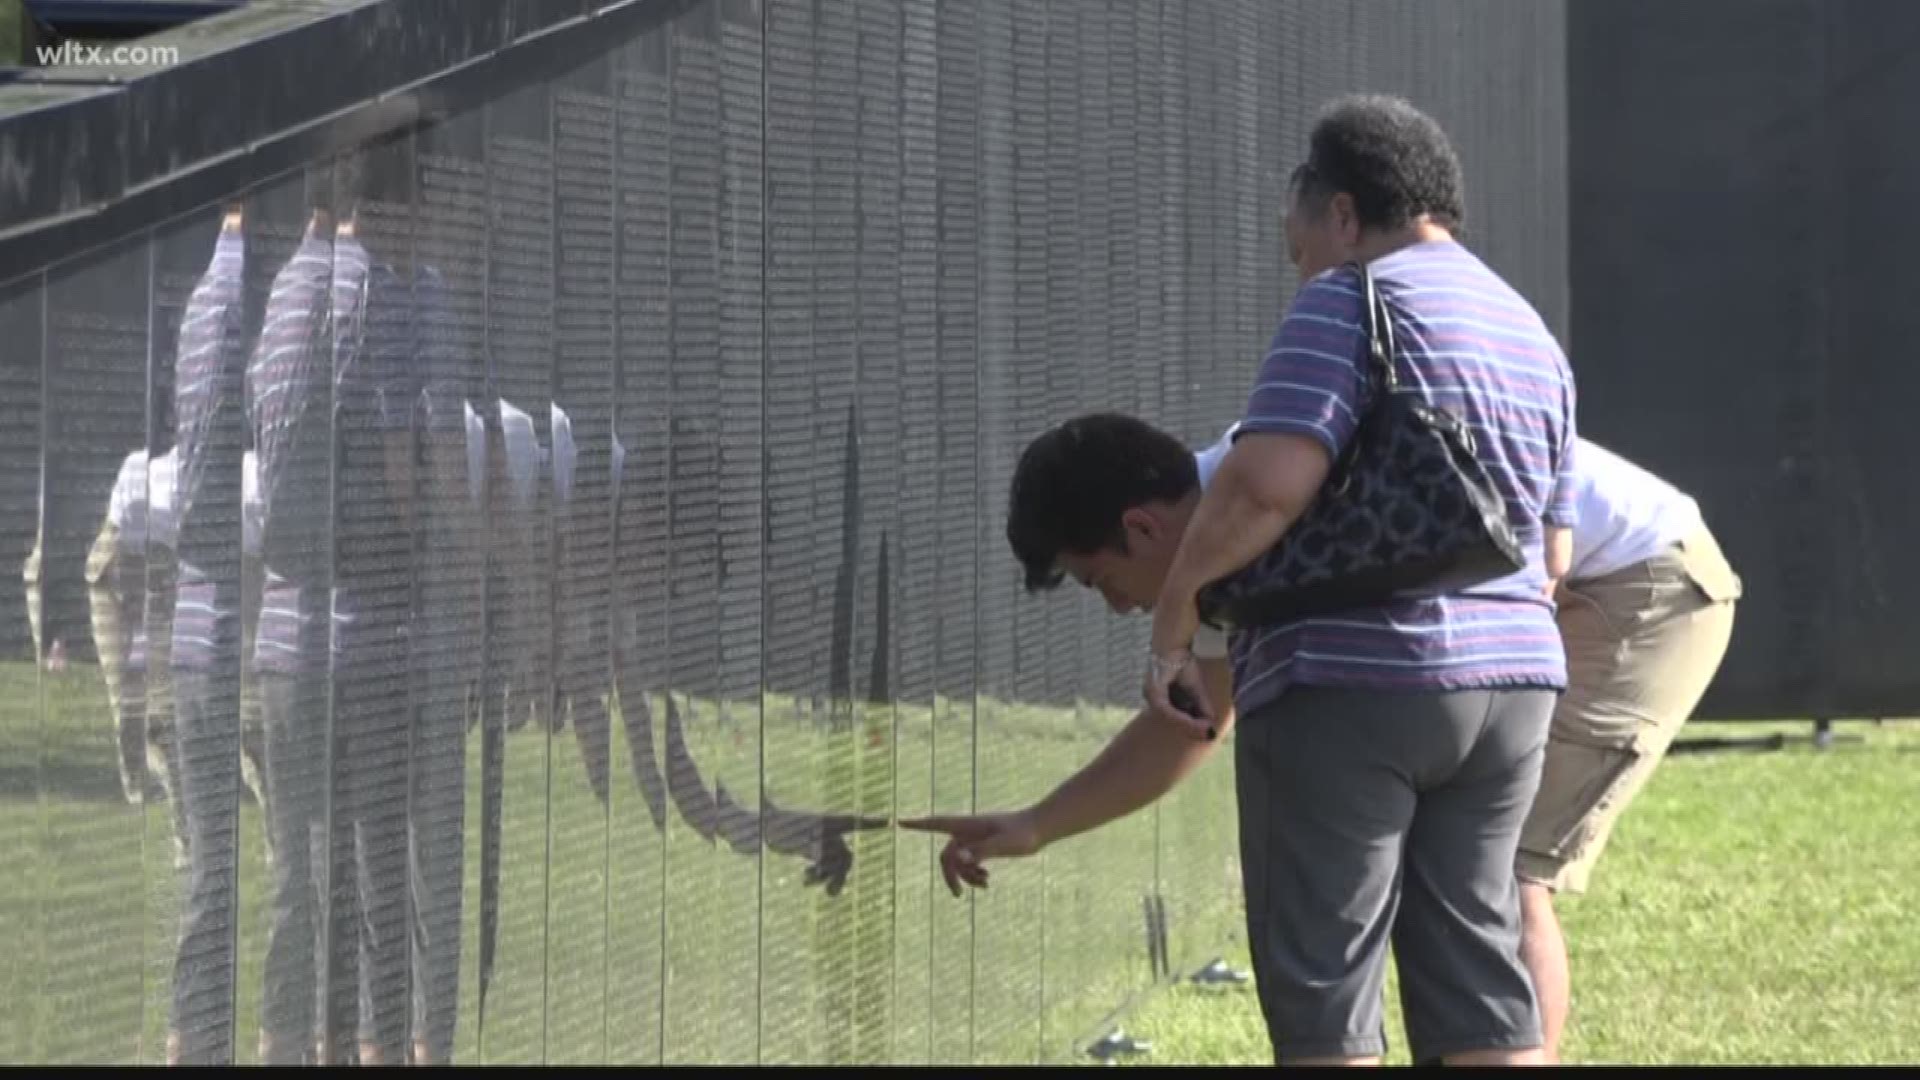 A mobile replica of the Vietnam Memorial is on display in Kershaw county.   Better known as the "Wall that Heals", organizers hope this display does just that for veterans and their families 